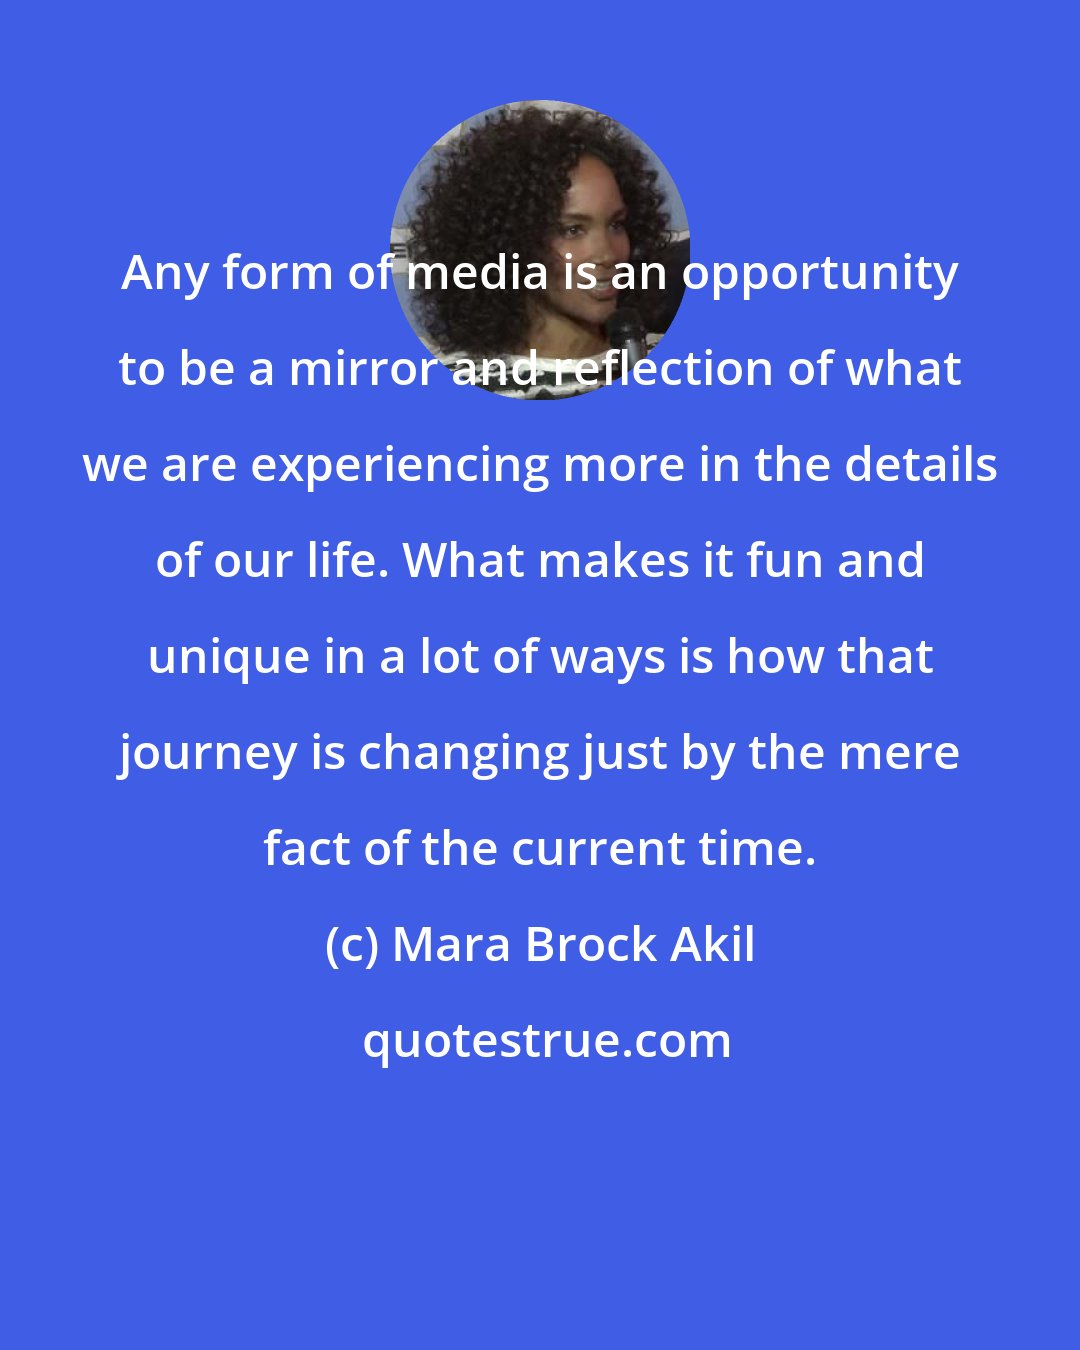 Mara Brock Akil: Any form of media is an opportunity to be a mirror and reflection of what we are experiencing more in the details of our life. What makes it fun and unique in a lot of ways is how that journey is changing just by the mere fact of the current time.